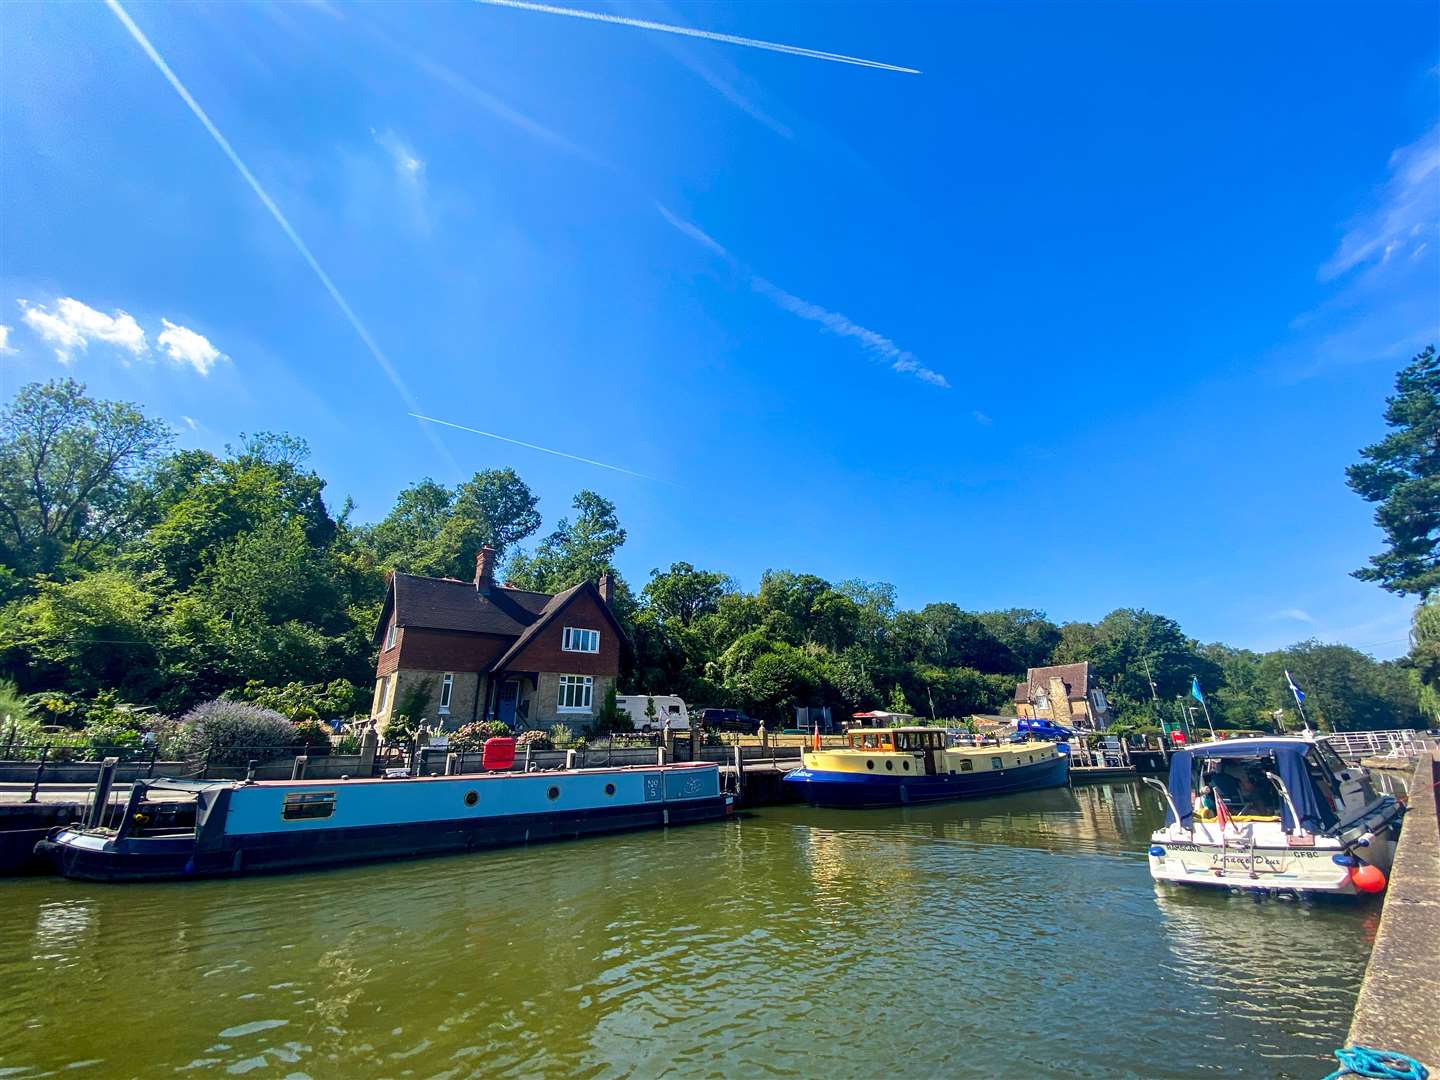 A stroll along Allington Lock with a pit stop at this café was a great way to spend the morning. Picture: Sam Lawrie